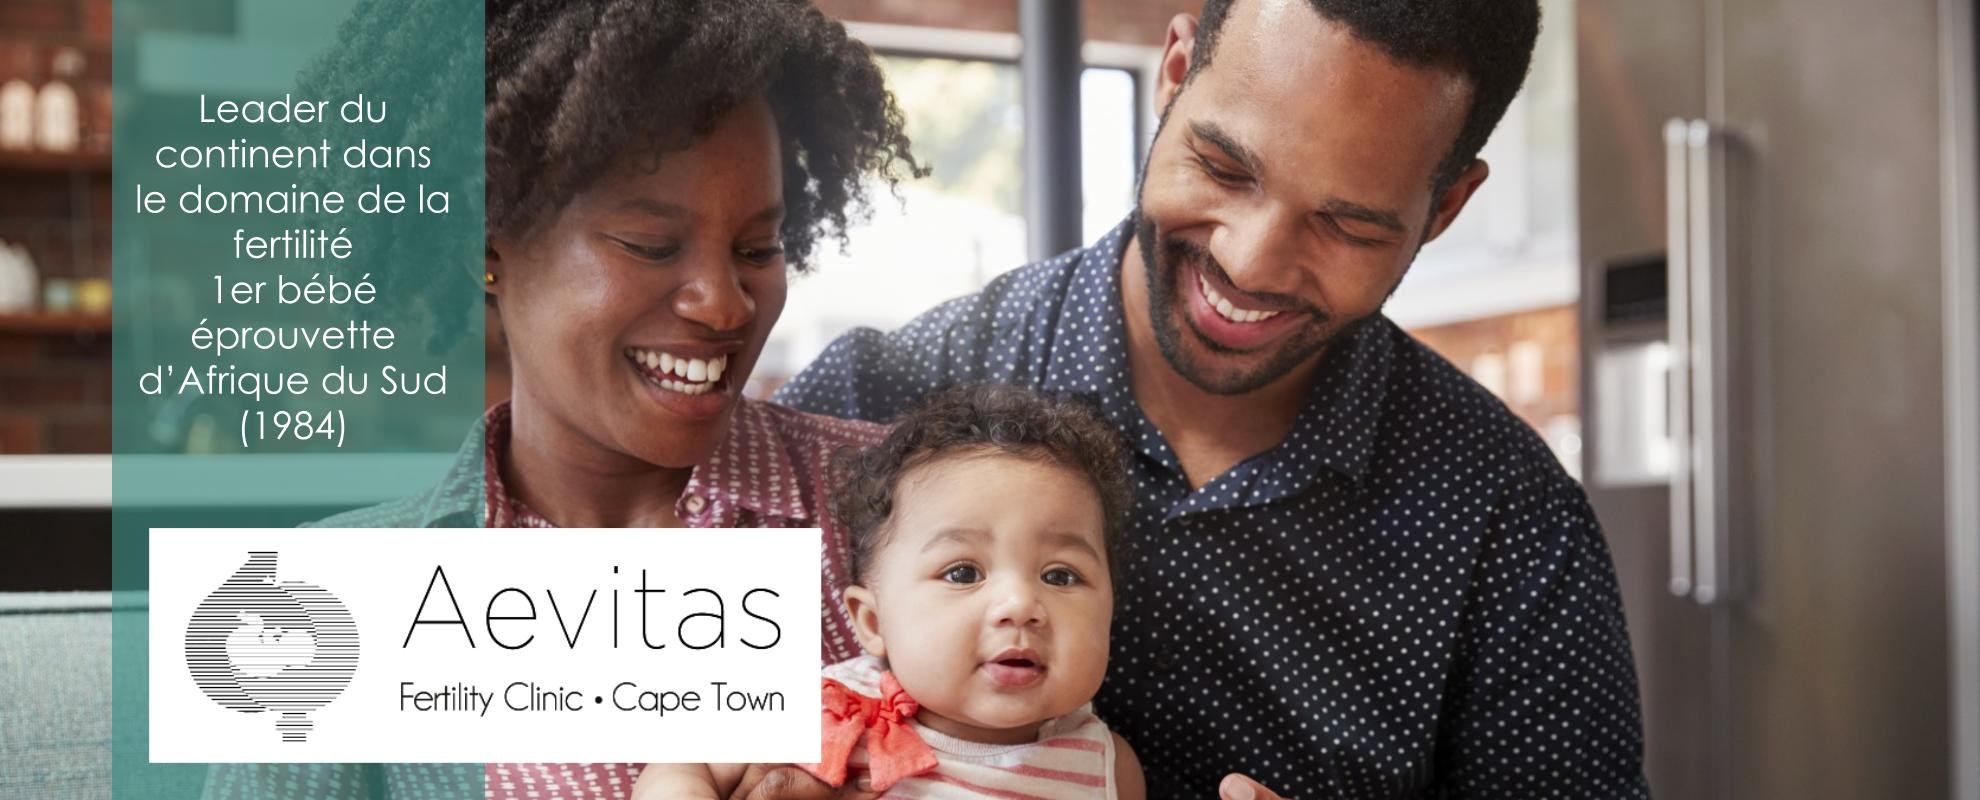 Aevitas Fertility Clinic for International Patients from French speaking countries